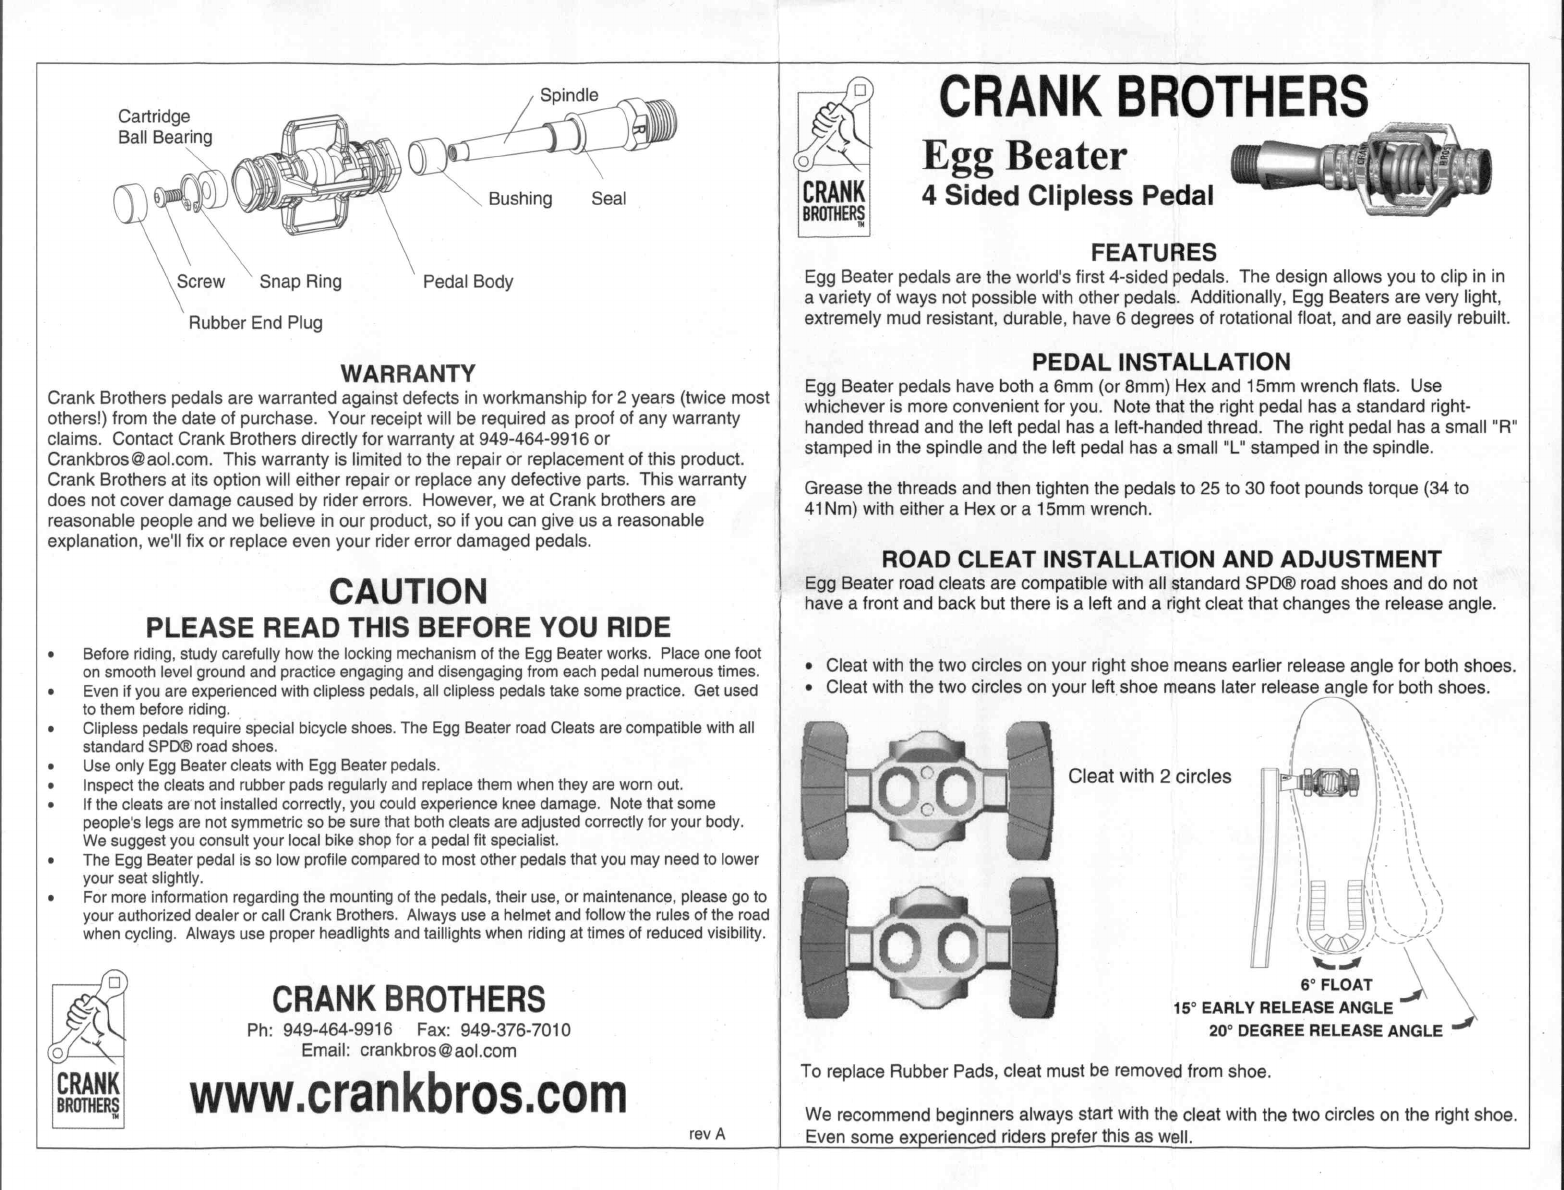 crank brothers egg beater cleats